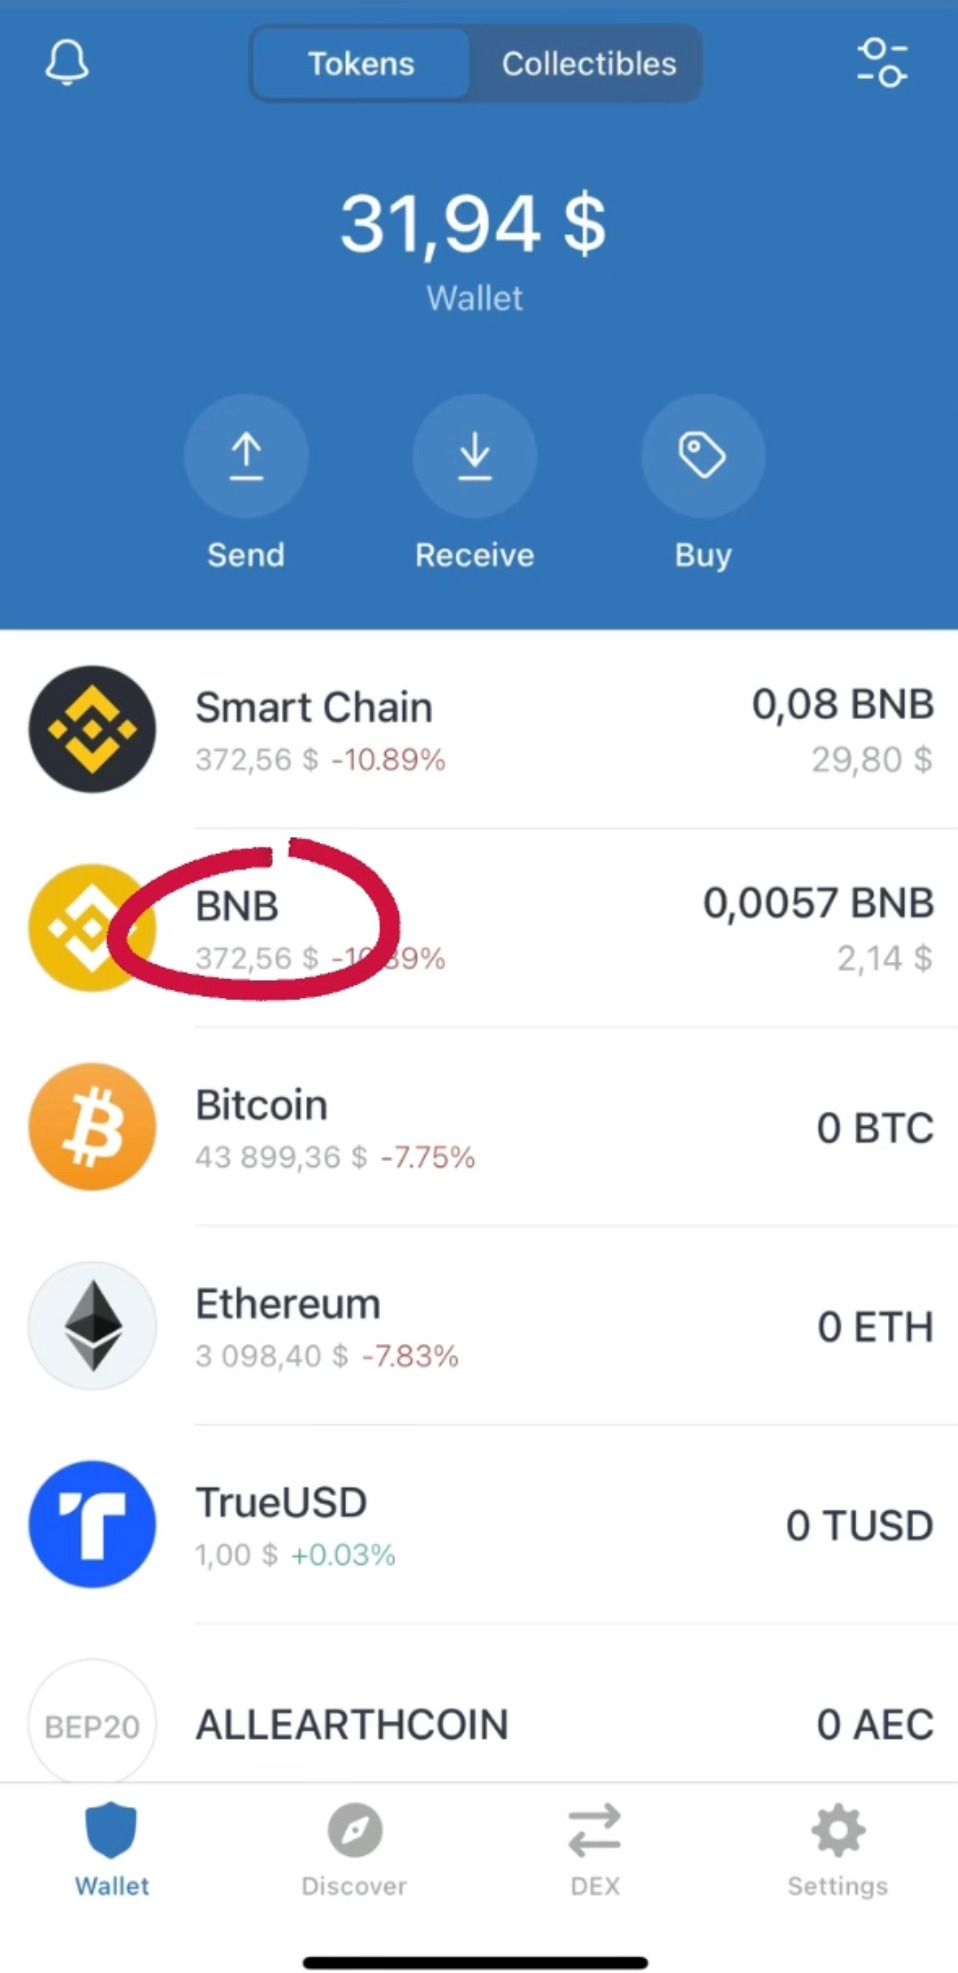 You have BNB on your balance!